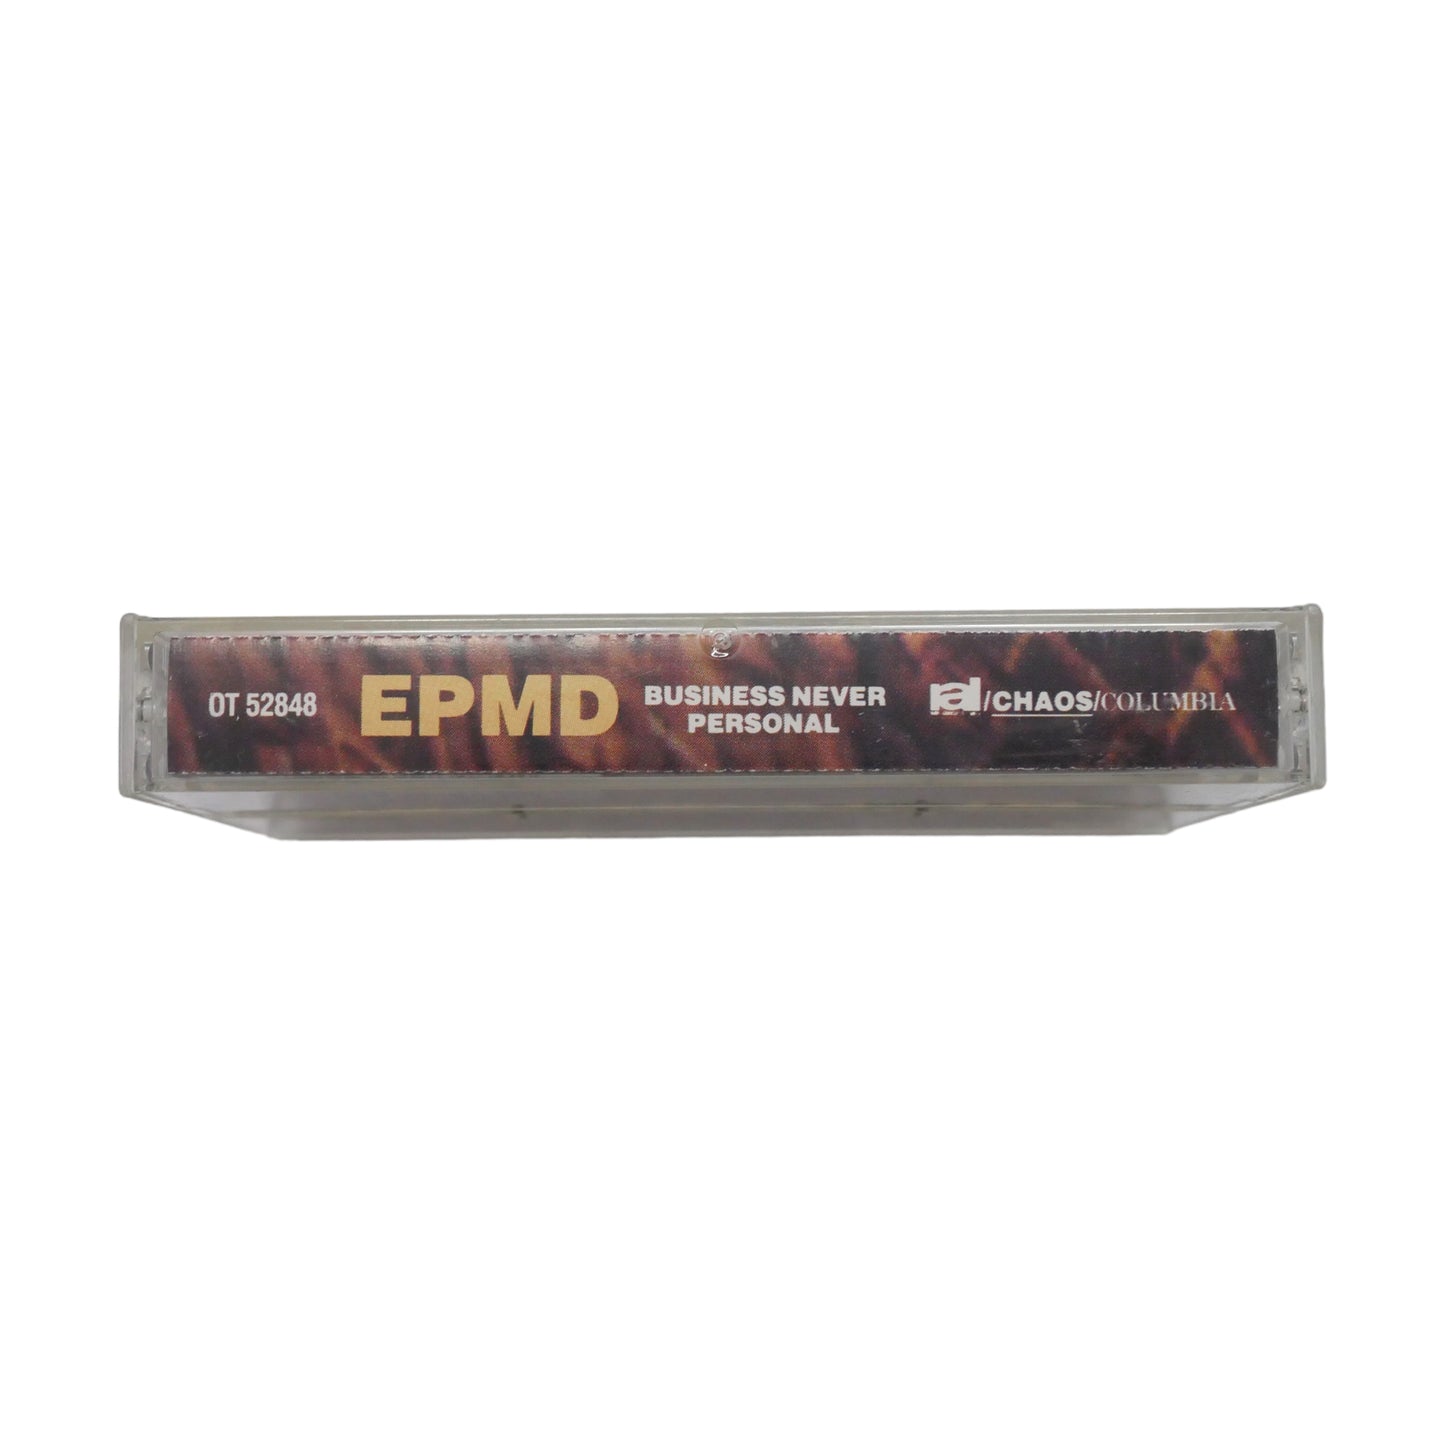 EPMD - 'Business Never Personal' Cassette